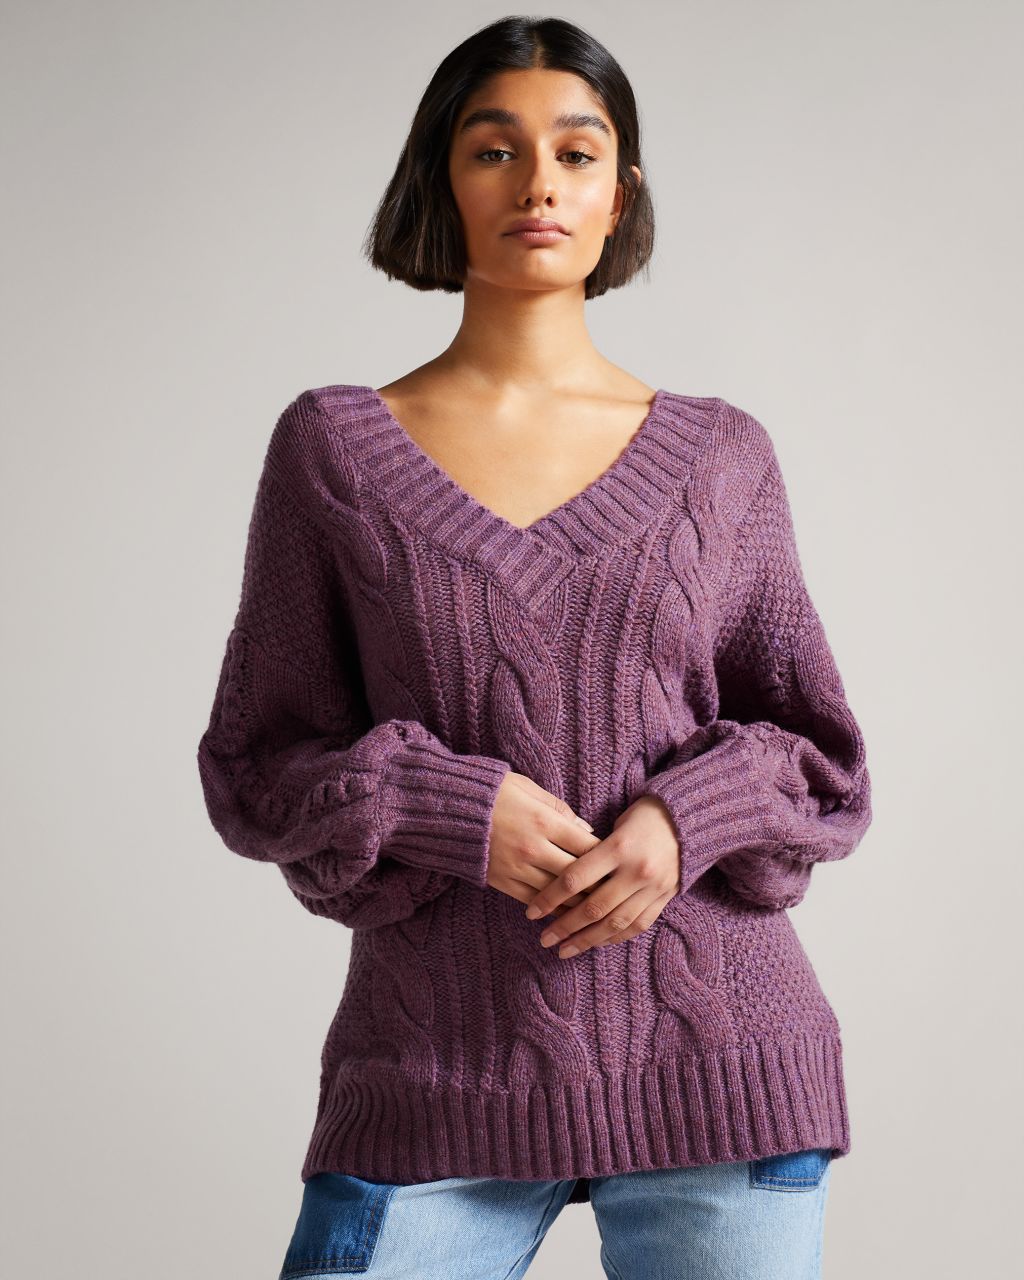 Ted Baker Women's Cable Bobble Knit Jumper in Lilac, Gaiaa, Wool